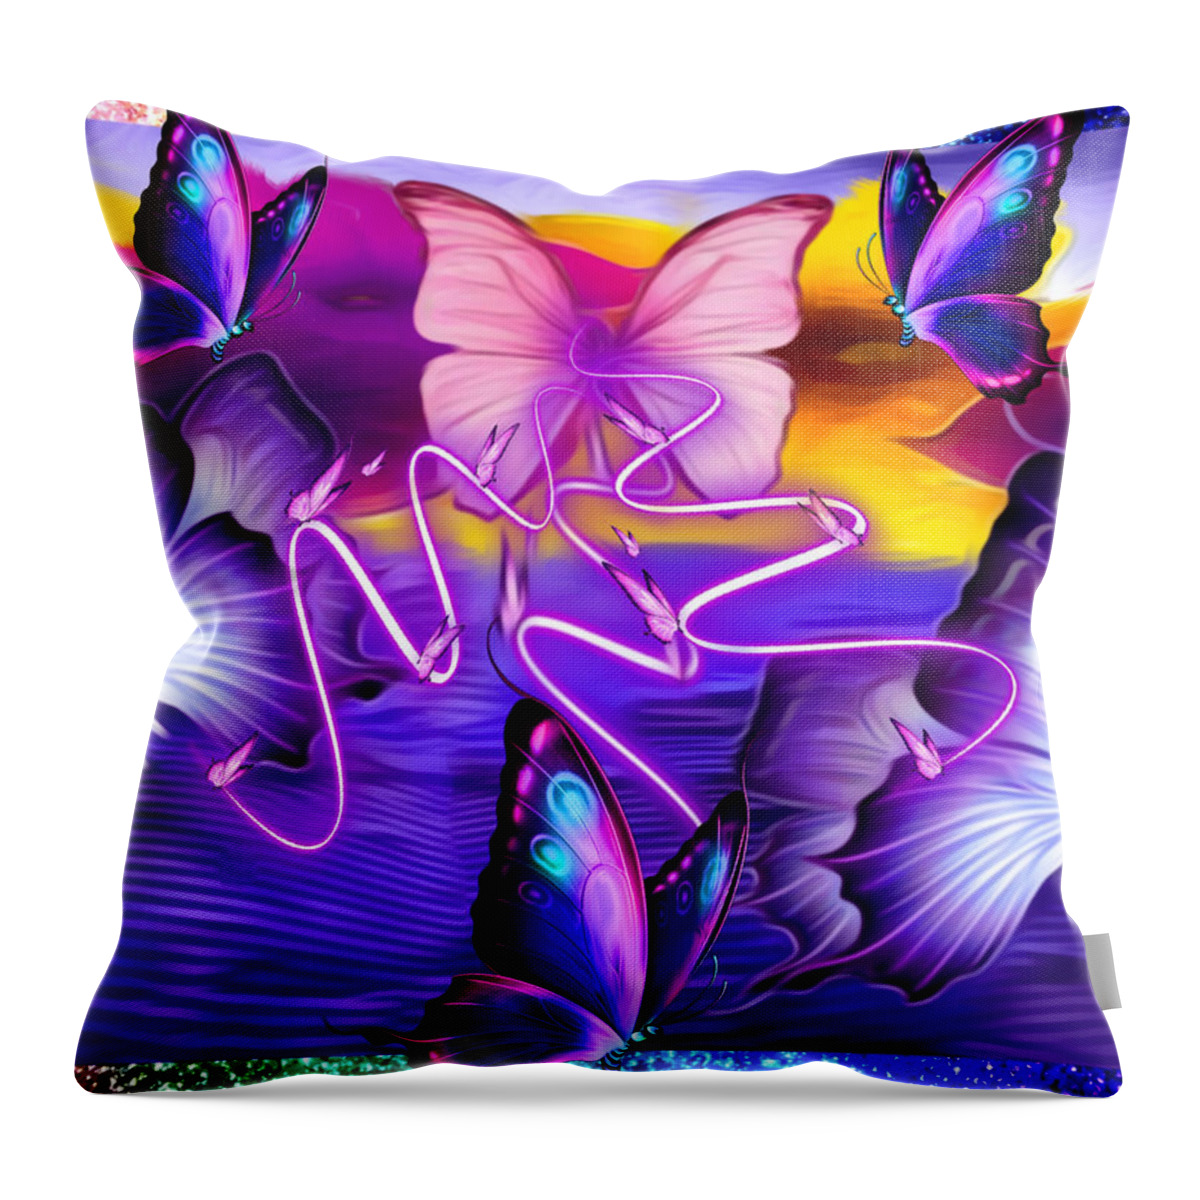 Digital Art Graphic Butterflies Throw Pillow featuring the digital art Join The Party by Gayle Price Thomas